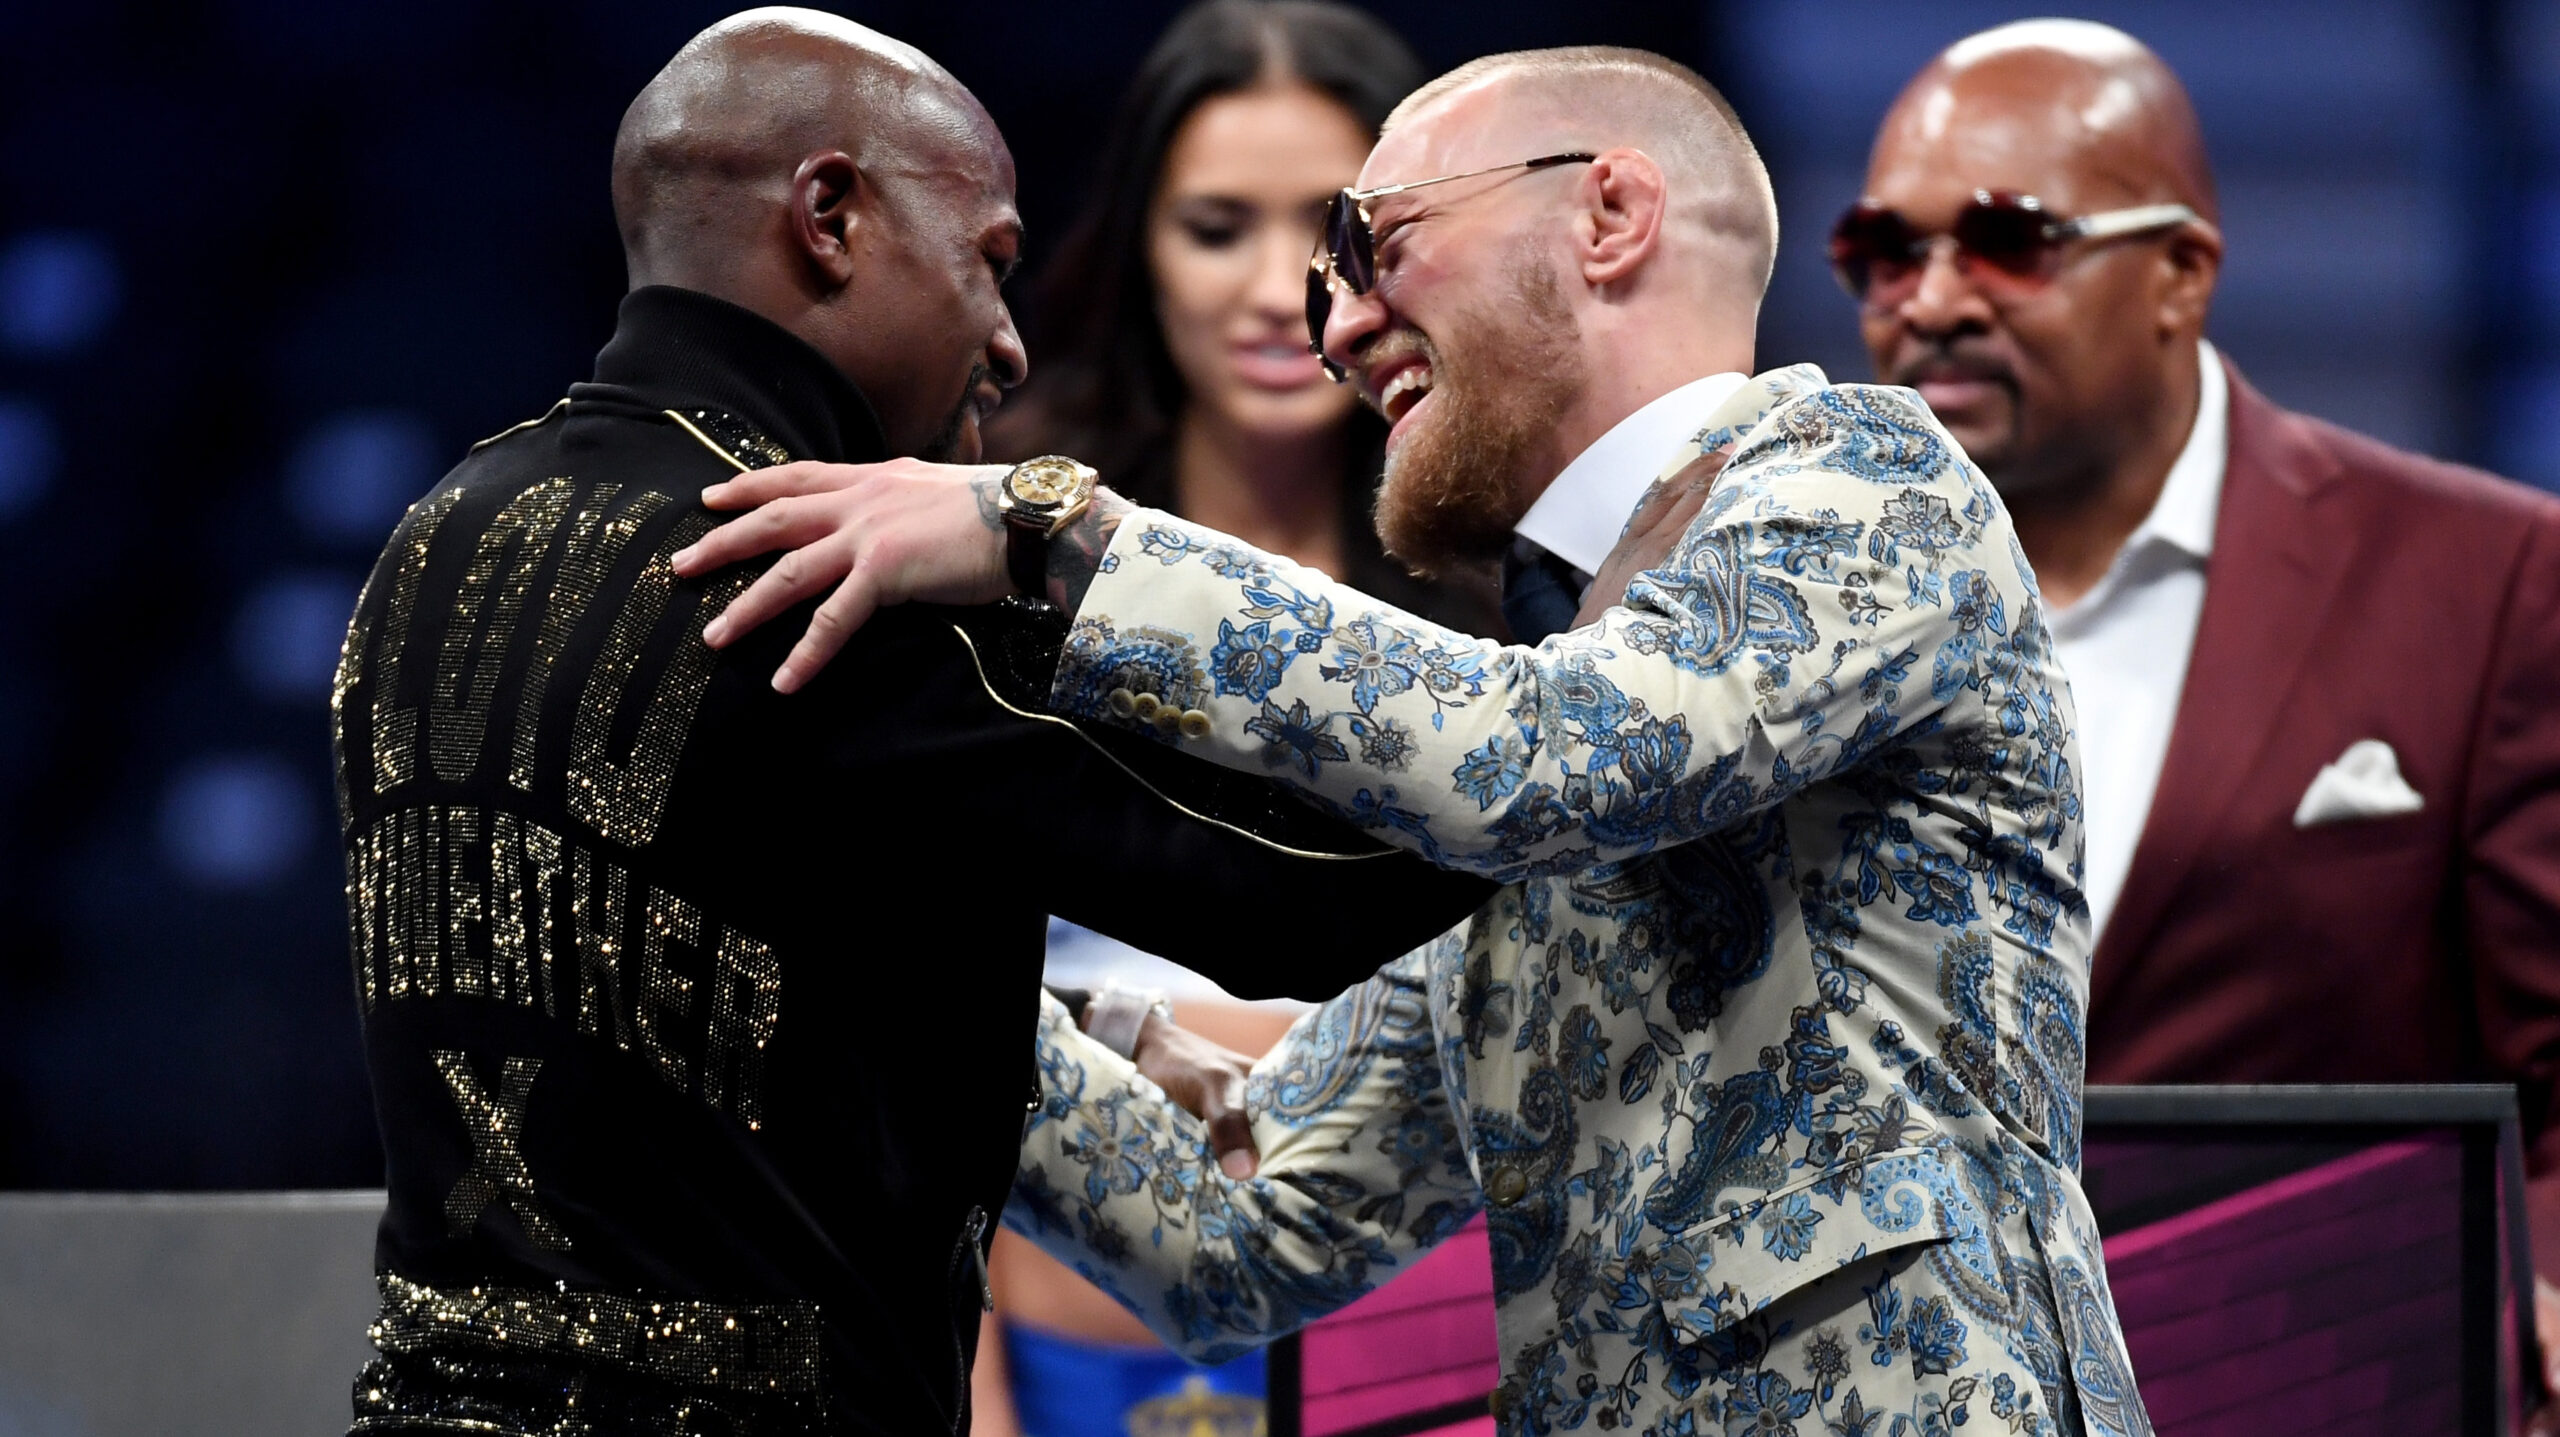 Mayweather Tried to Bet $400K On Himself, Casino Refused His Action